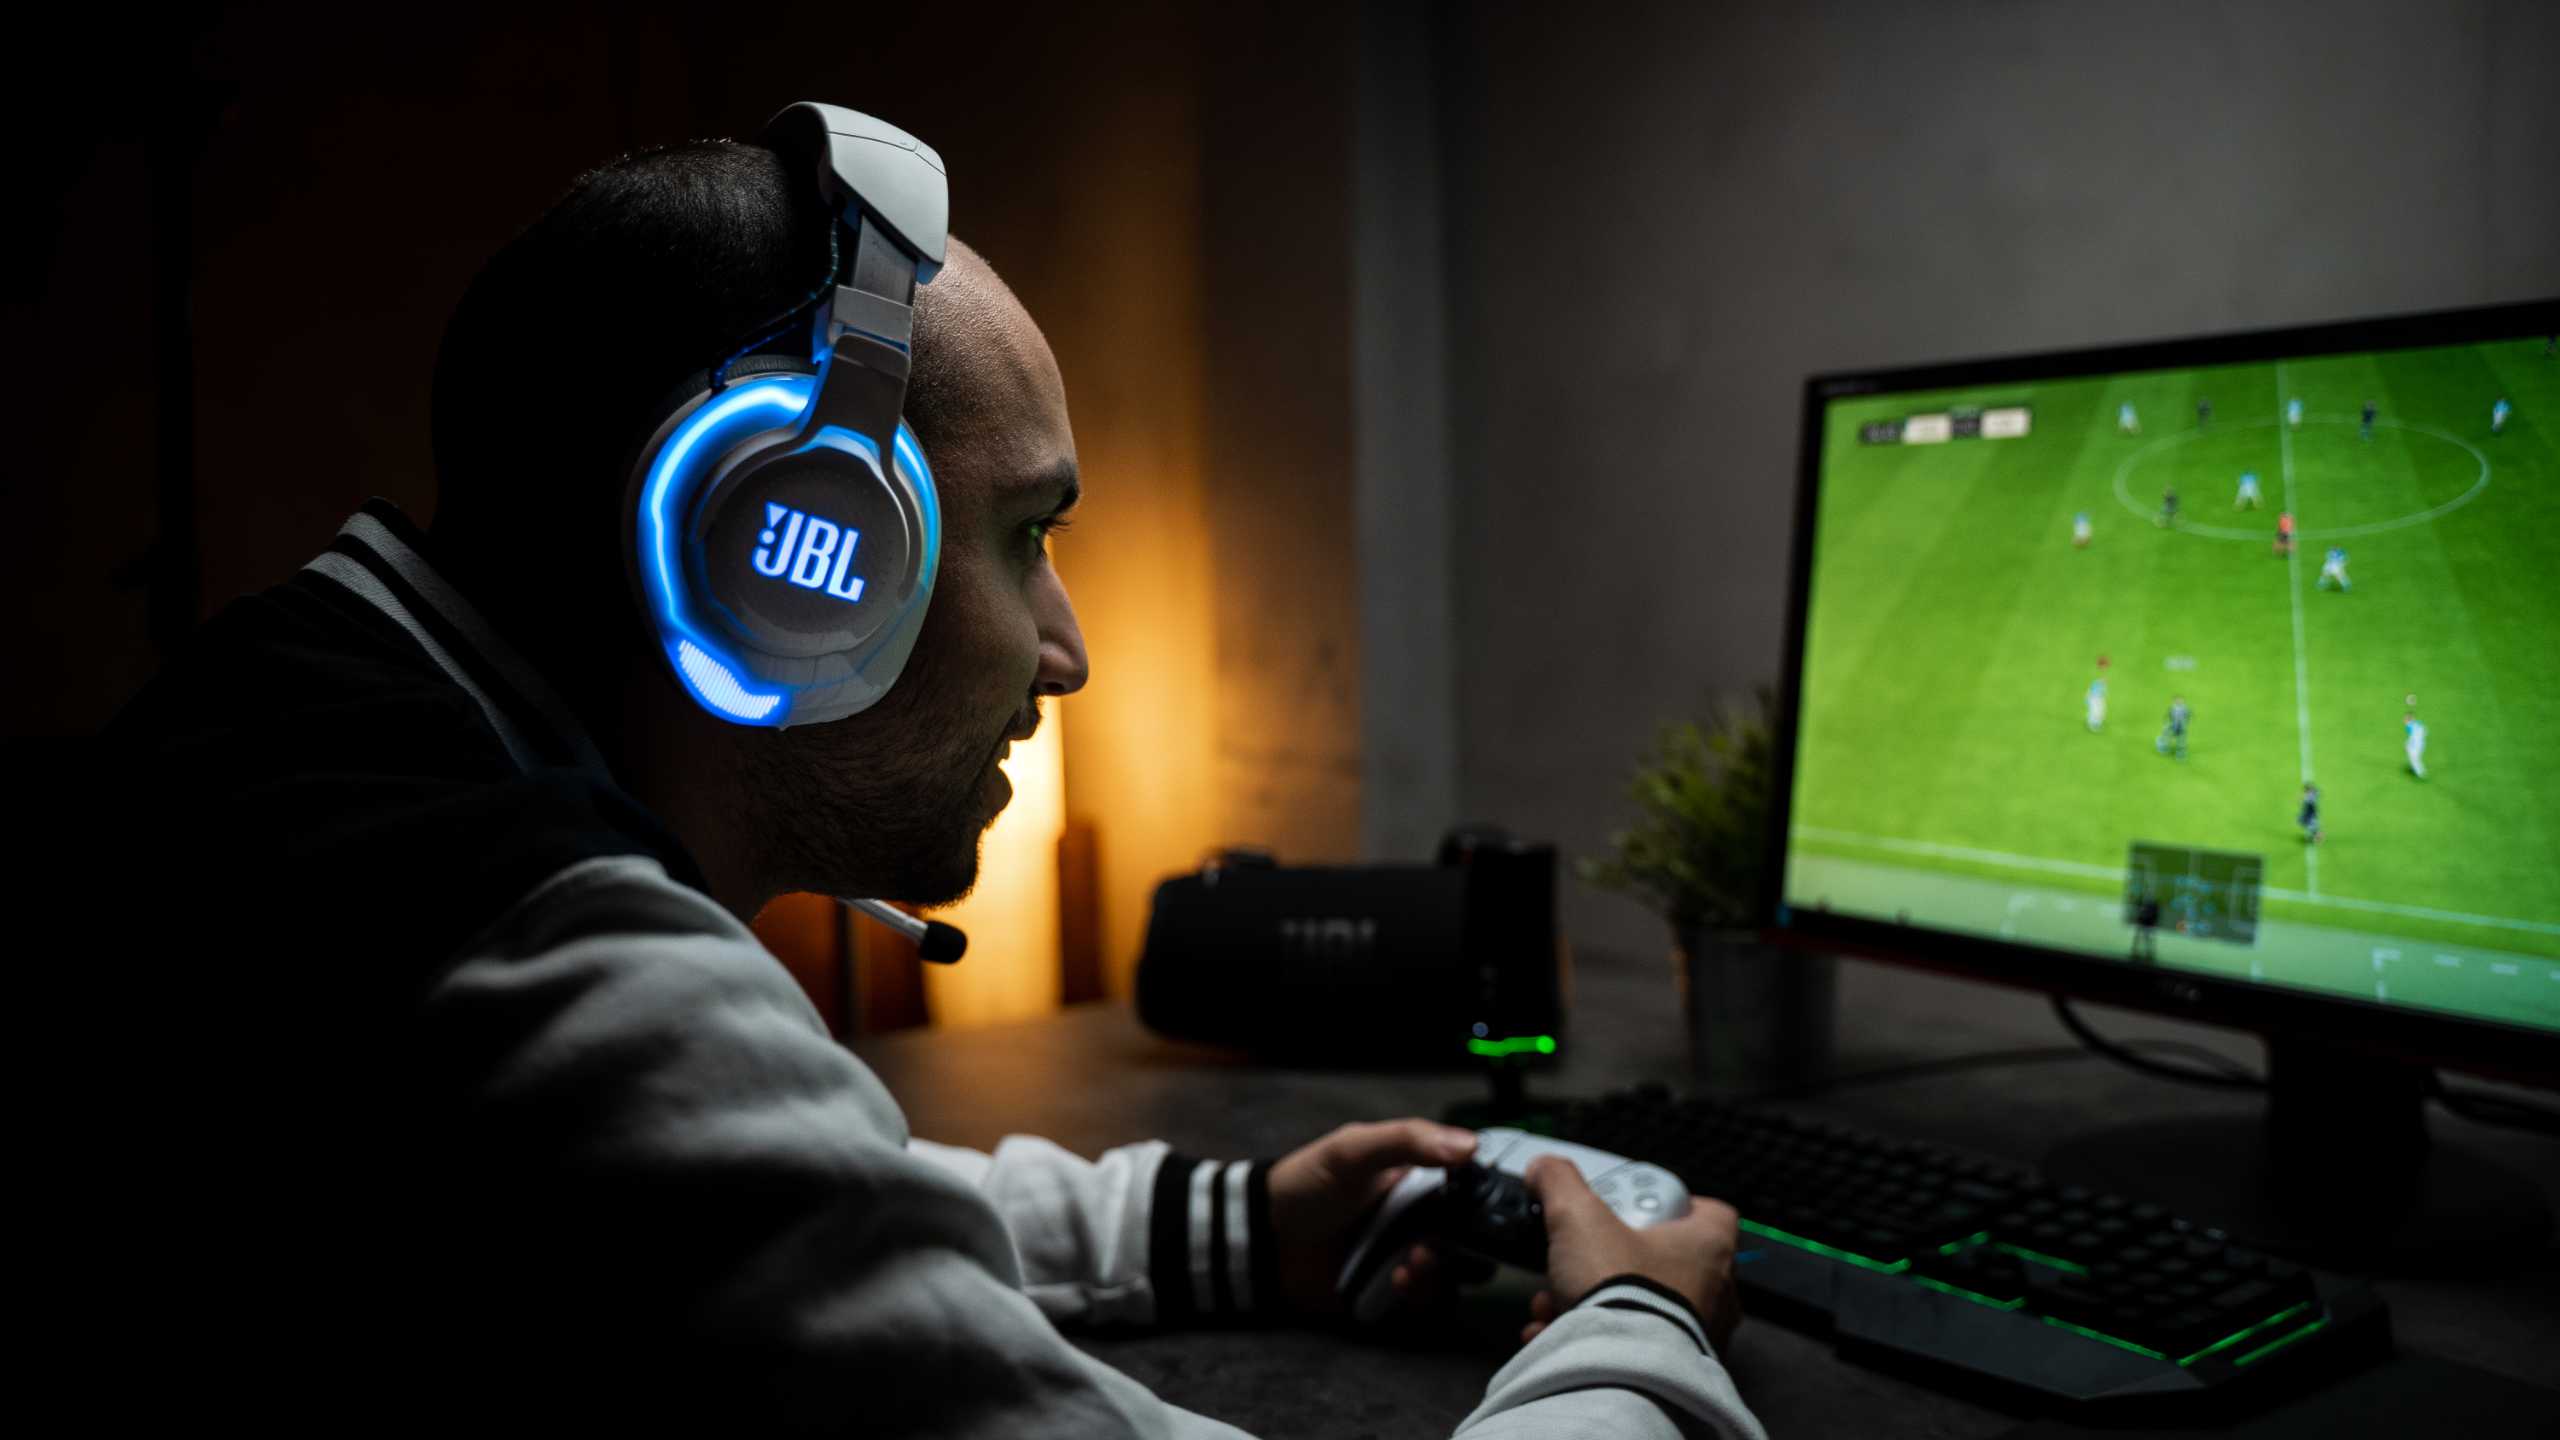 JBL Quantum gaming headphones for Xbox and Playstation are now available